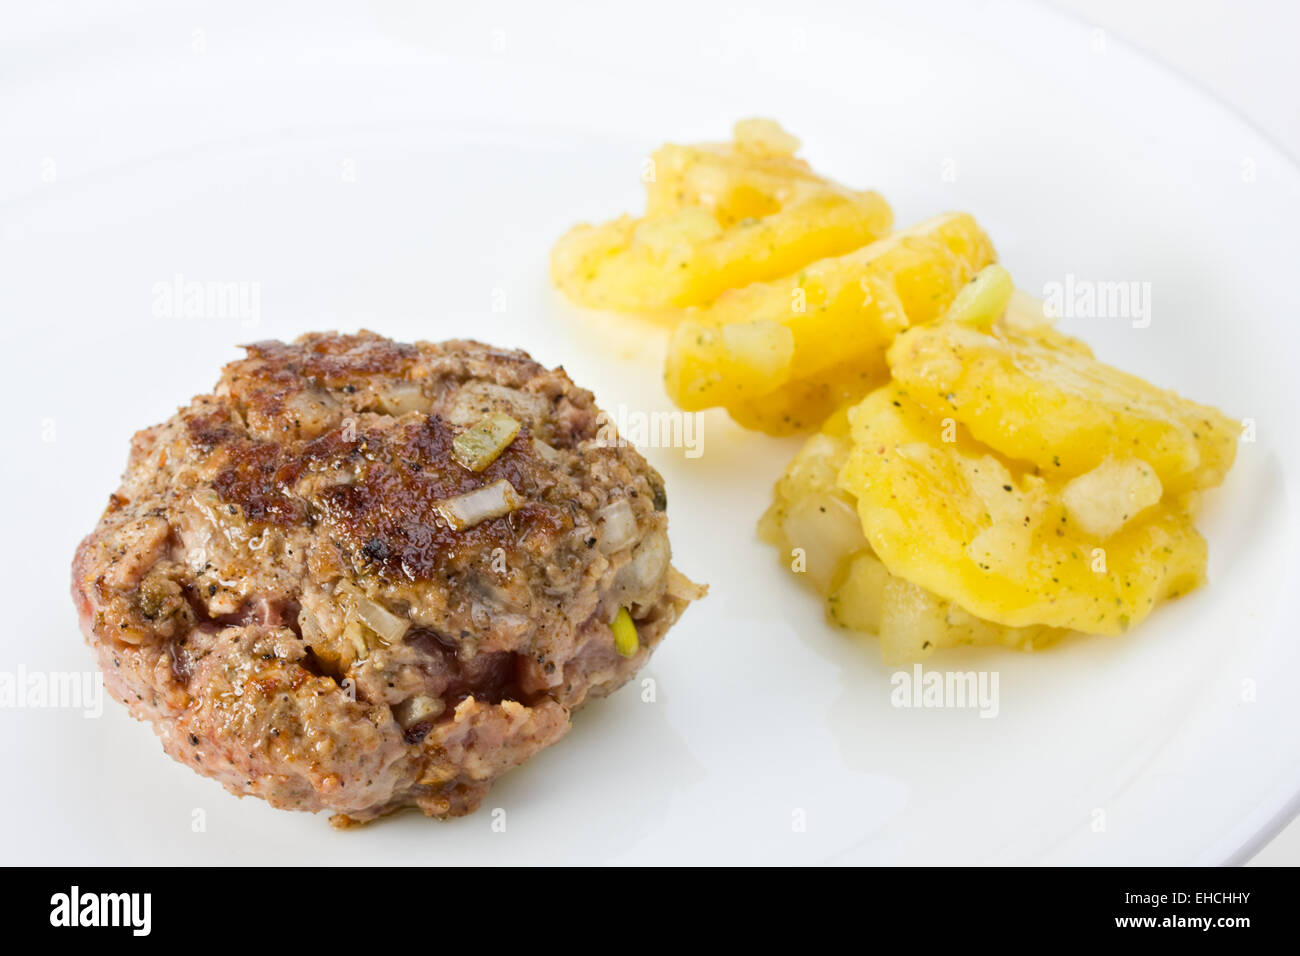 detail of a grilled meat ball Stock Photo